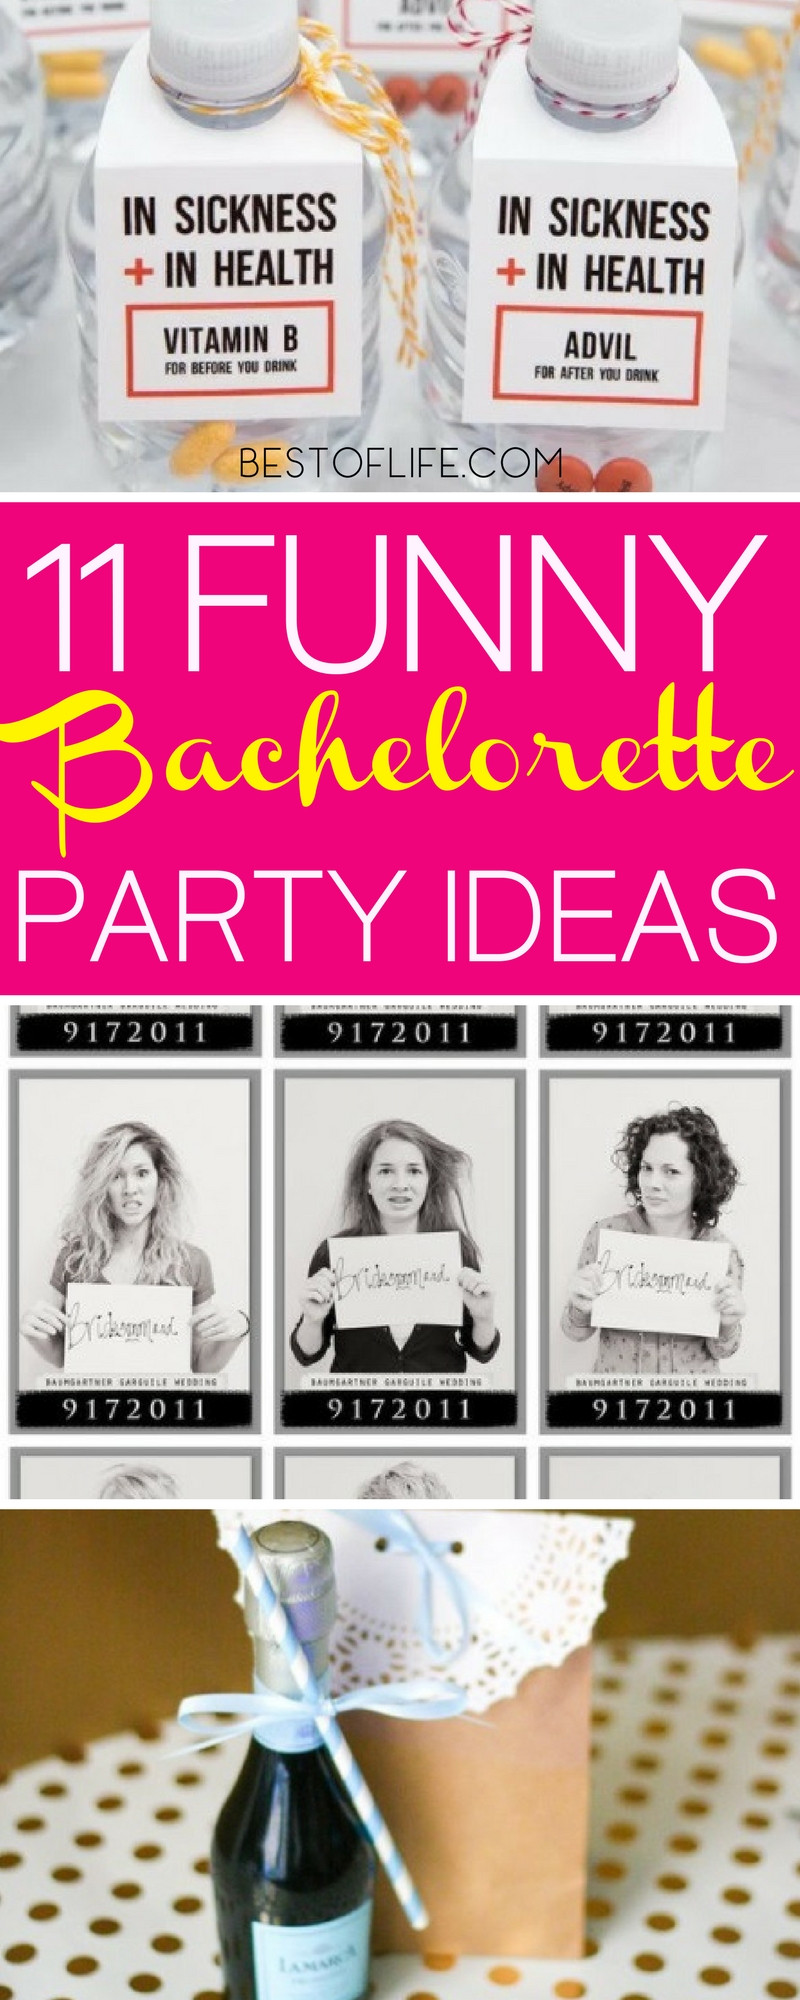 Bachelorette Party Games Ideas
 11 Funny Bachelorette Party Ideas and Games The Best of Life